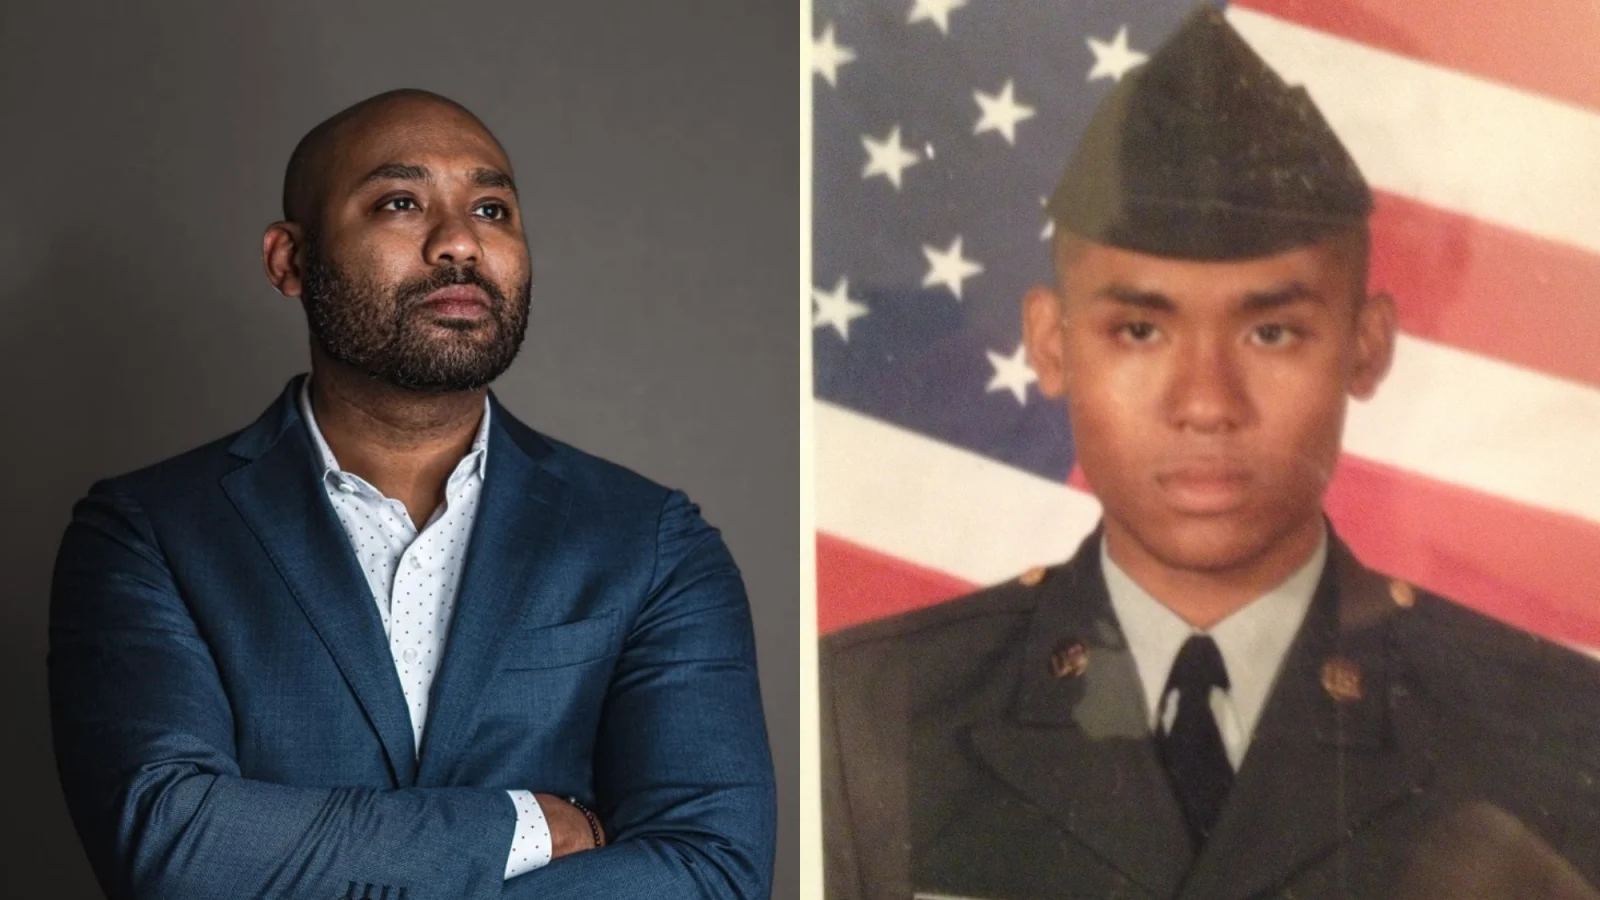 Two side-by-side images of a graduate student (left) wearing a navy blue suit and a light blue collared shirt with his arms crossed and on the right side, an image of the same student as a veteran, wearing army regalia and a green hat with an American flag behind him.